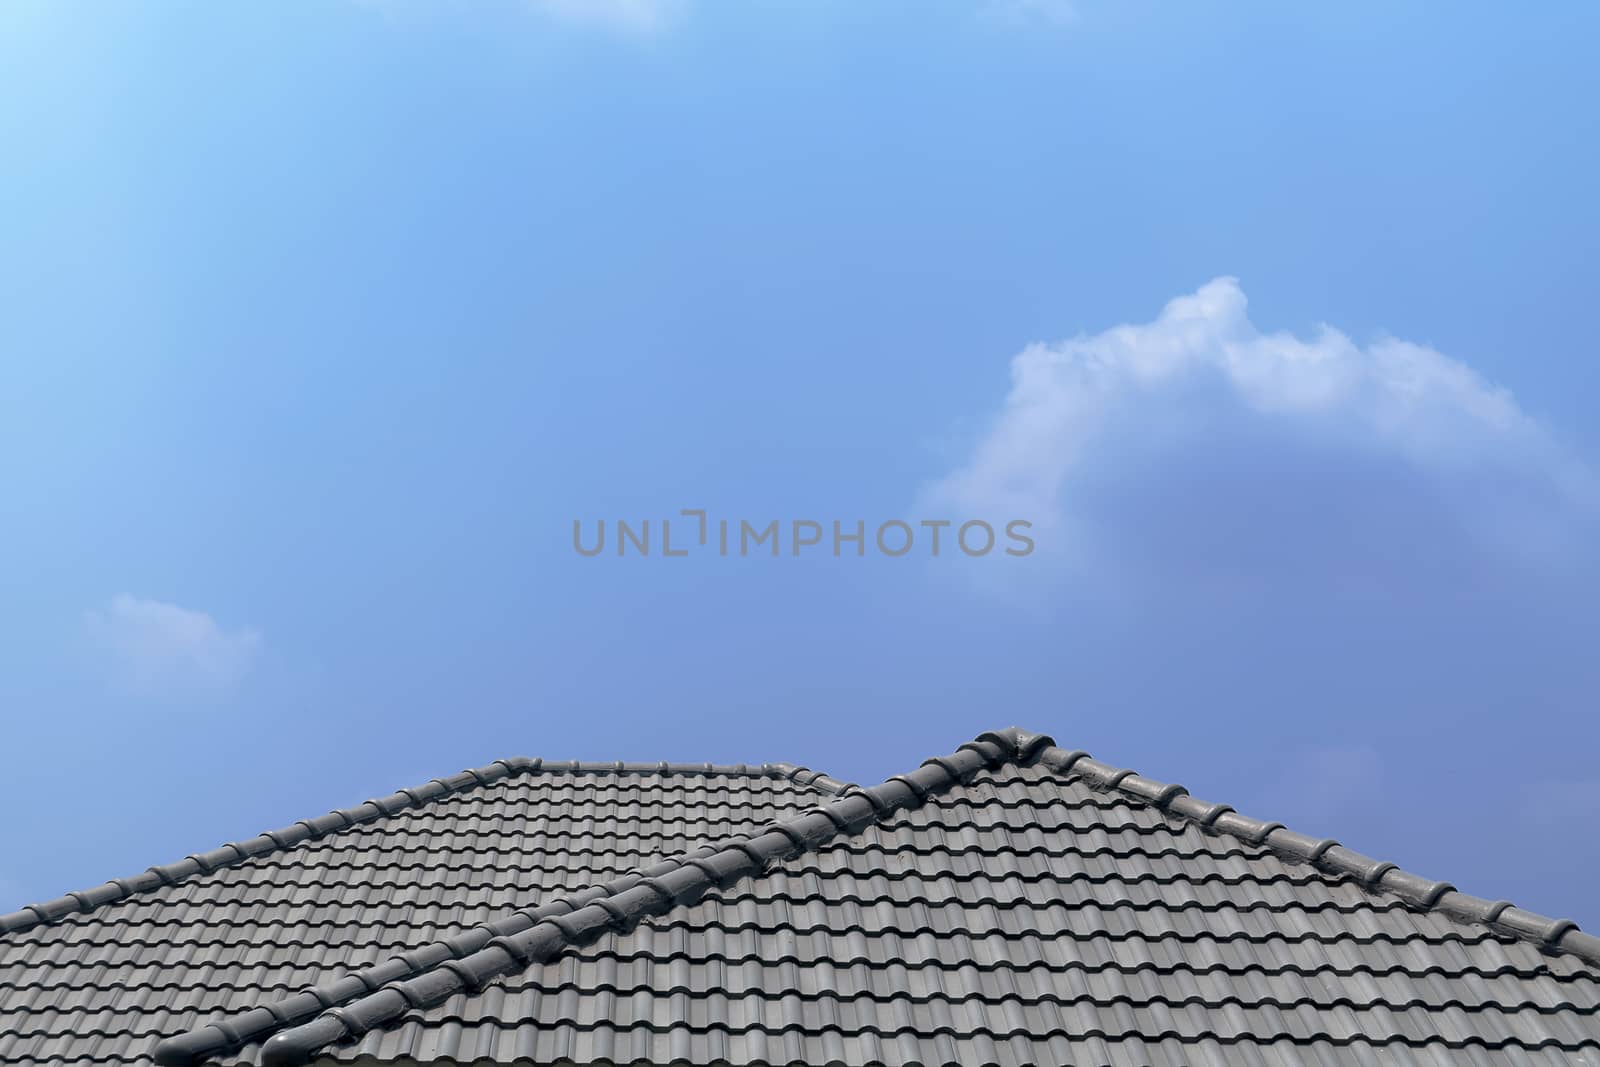 Roof house with tiled roof on blue sky